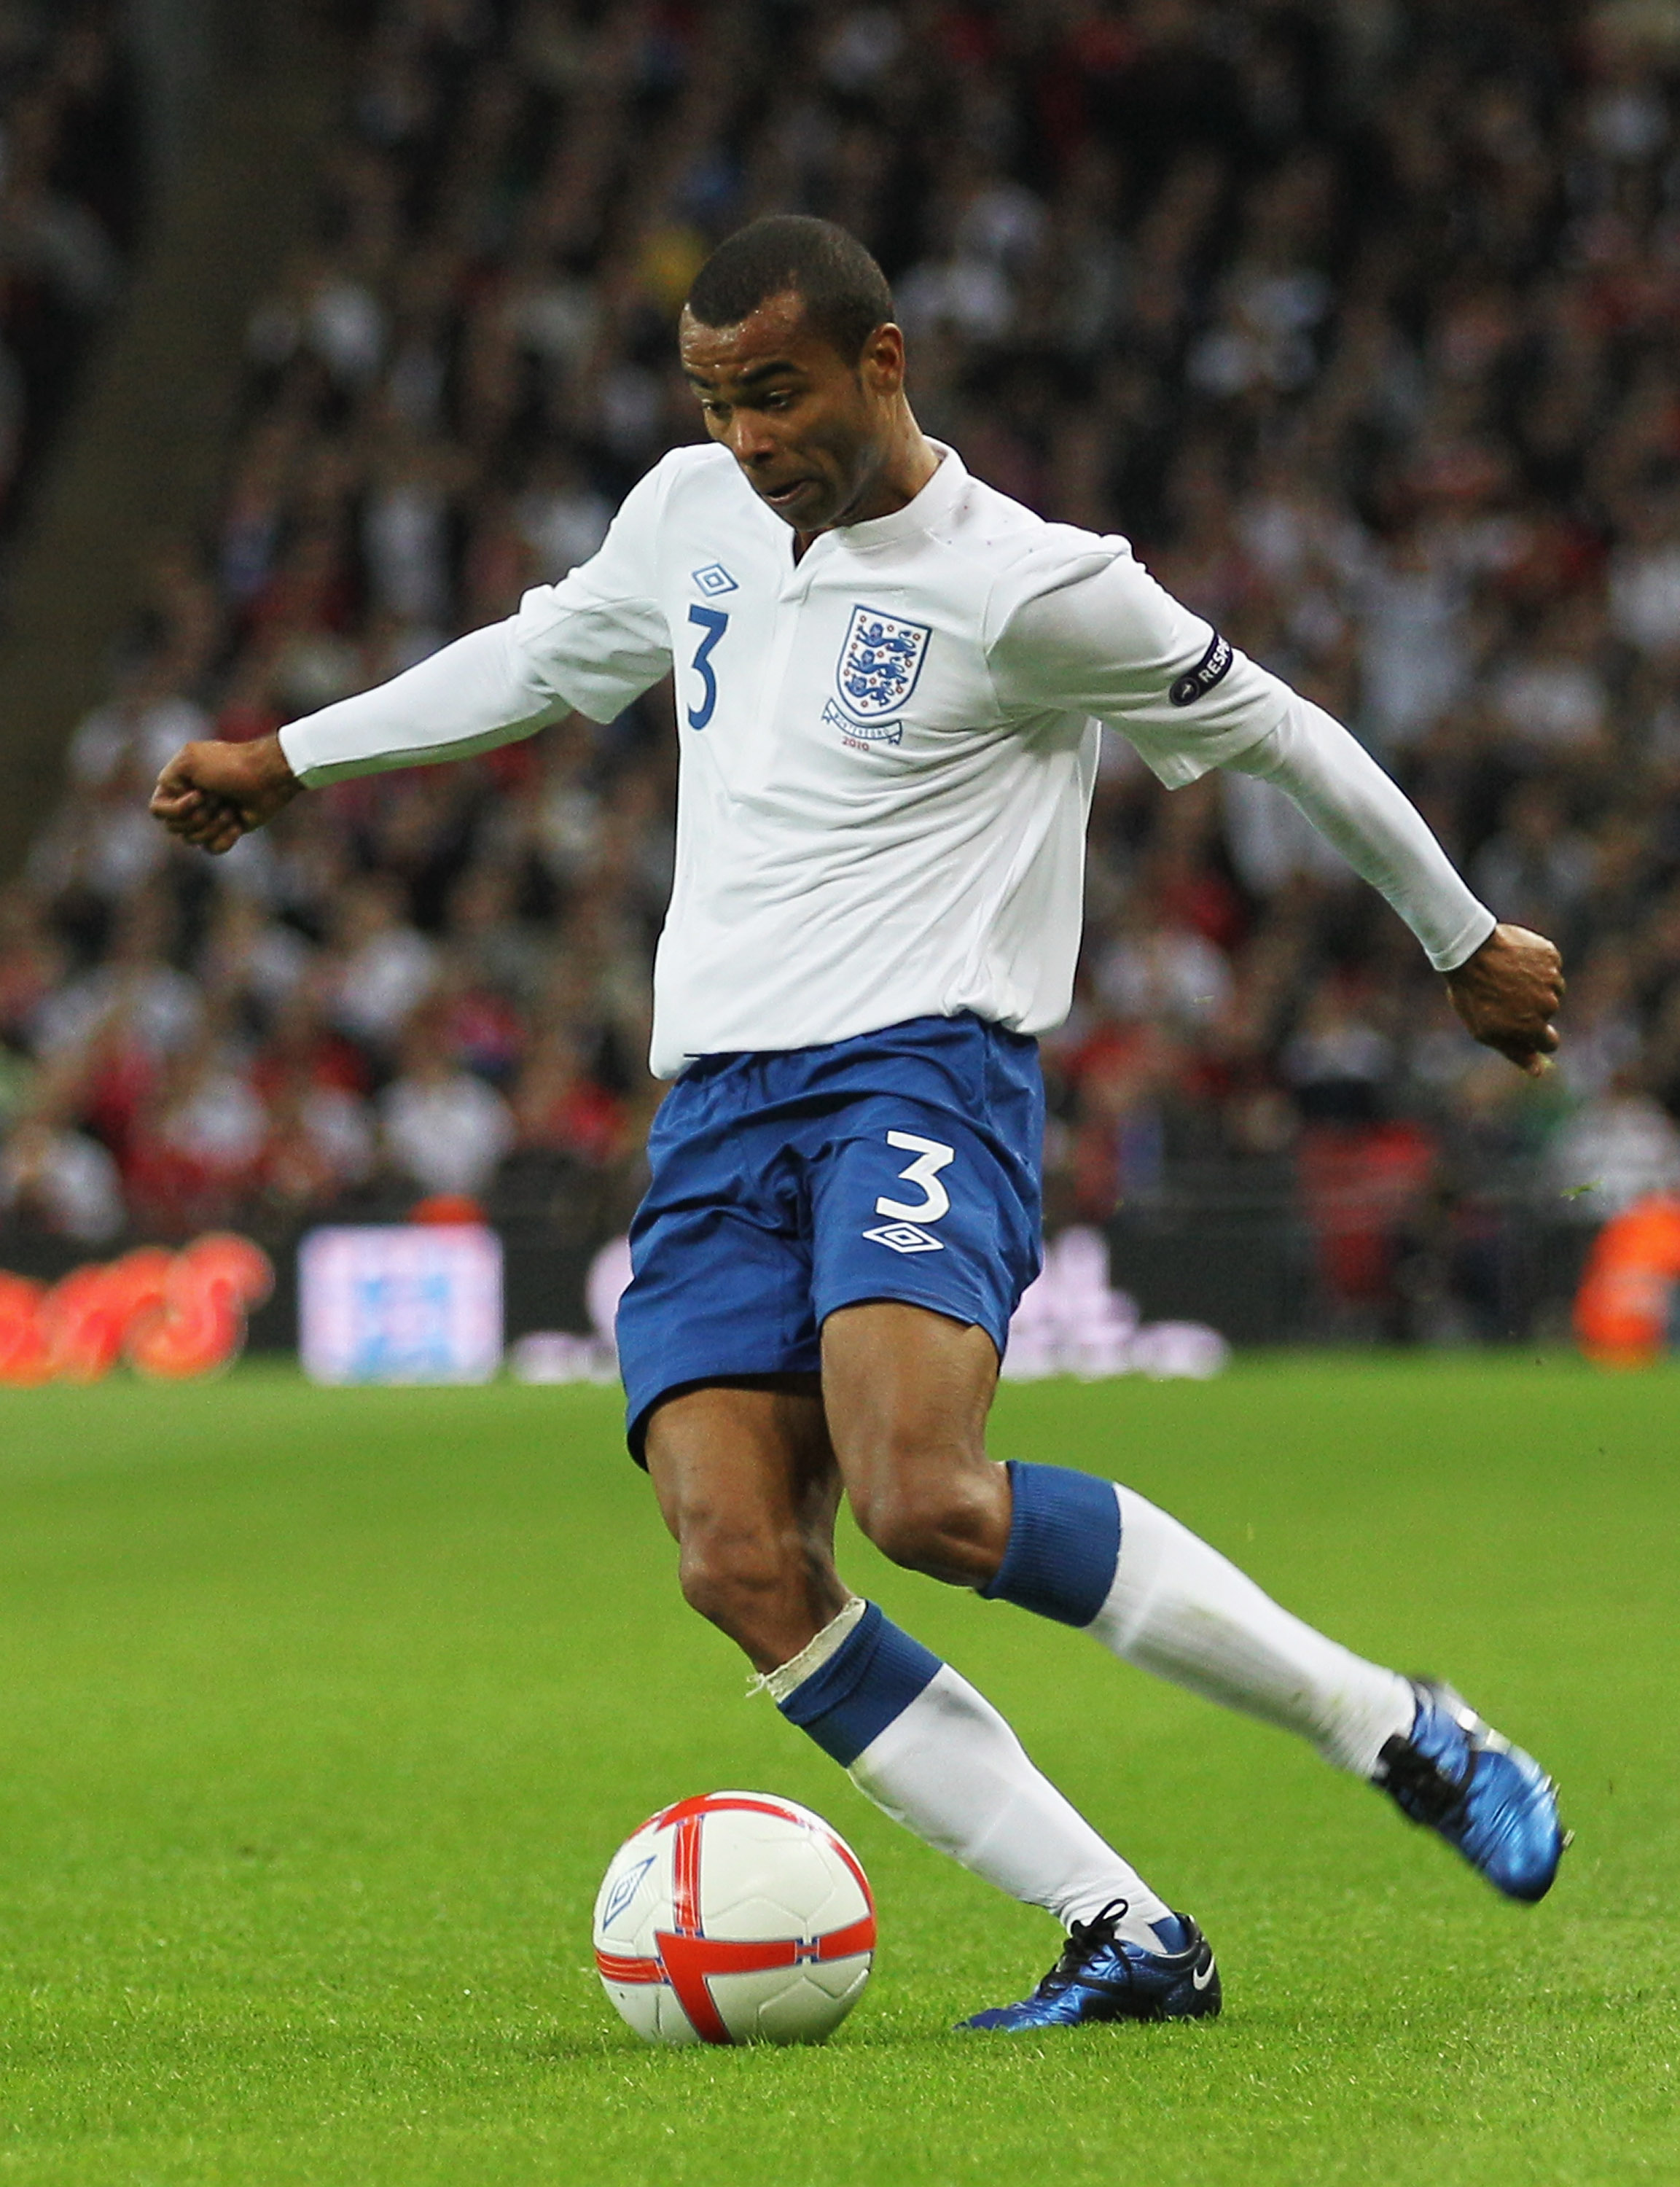 LONDON, ENGLAND - OCTOBER 12:  Ashley Cole of England in action during the UEFA EURO 2012 Group G Qualifying match between England and Montenegro at Wembley Stadium on October 12, 2010 in London, England.  (Photo by Hamish Blair/Getty Images)